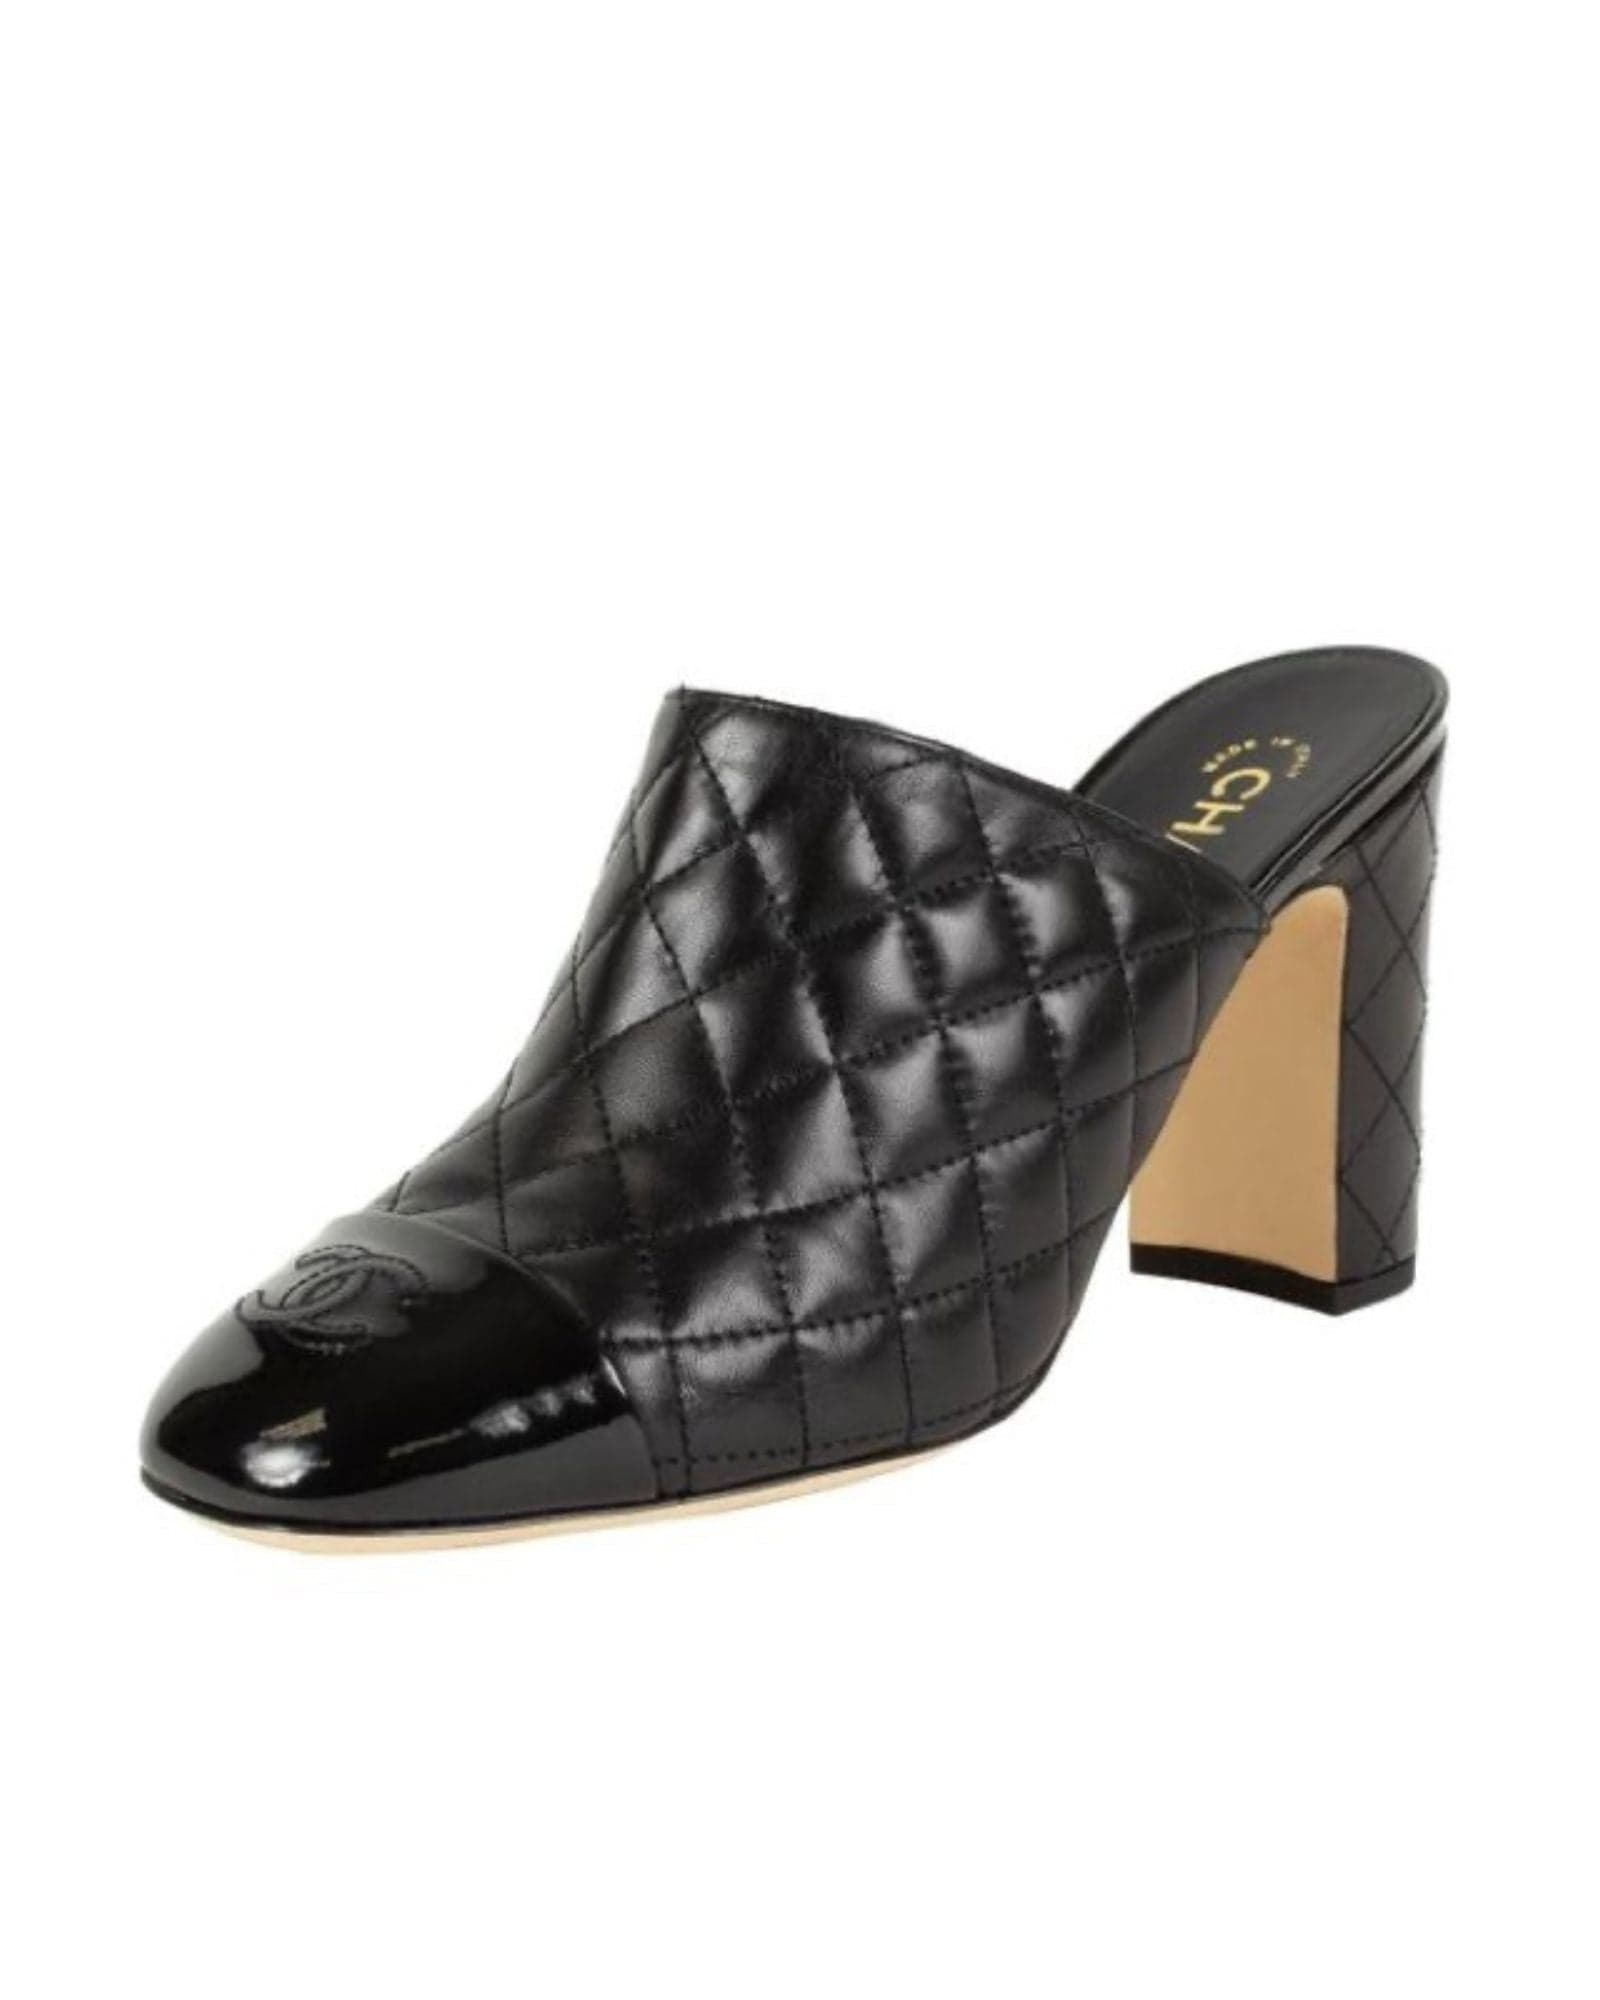 Chanel Lambskin Quilted CC Turnlock Loafers Black - Size 38 EU / 8 US